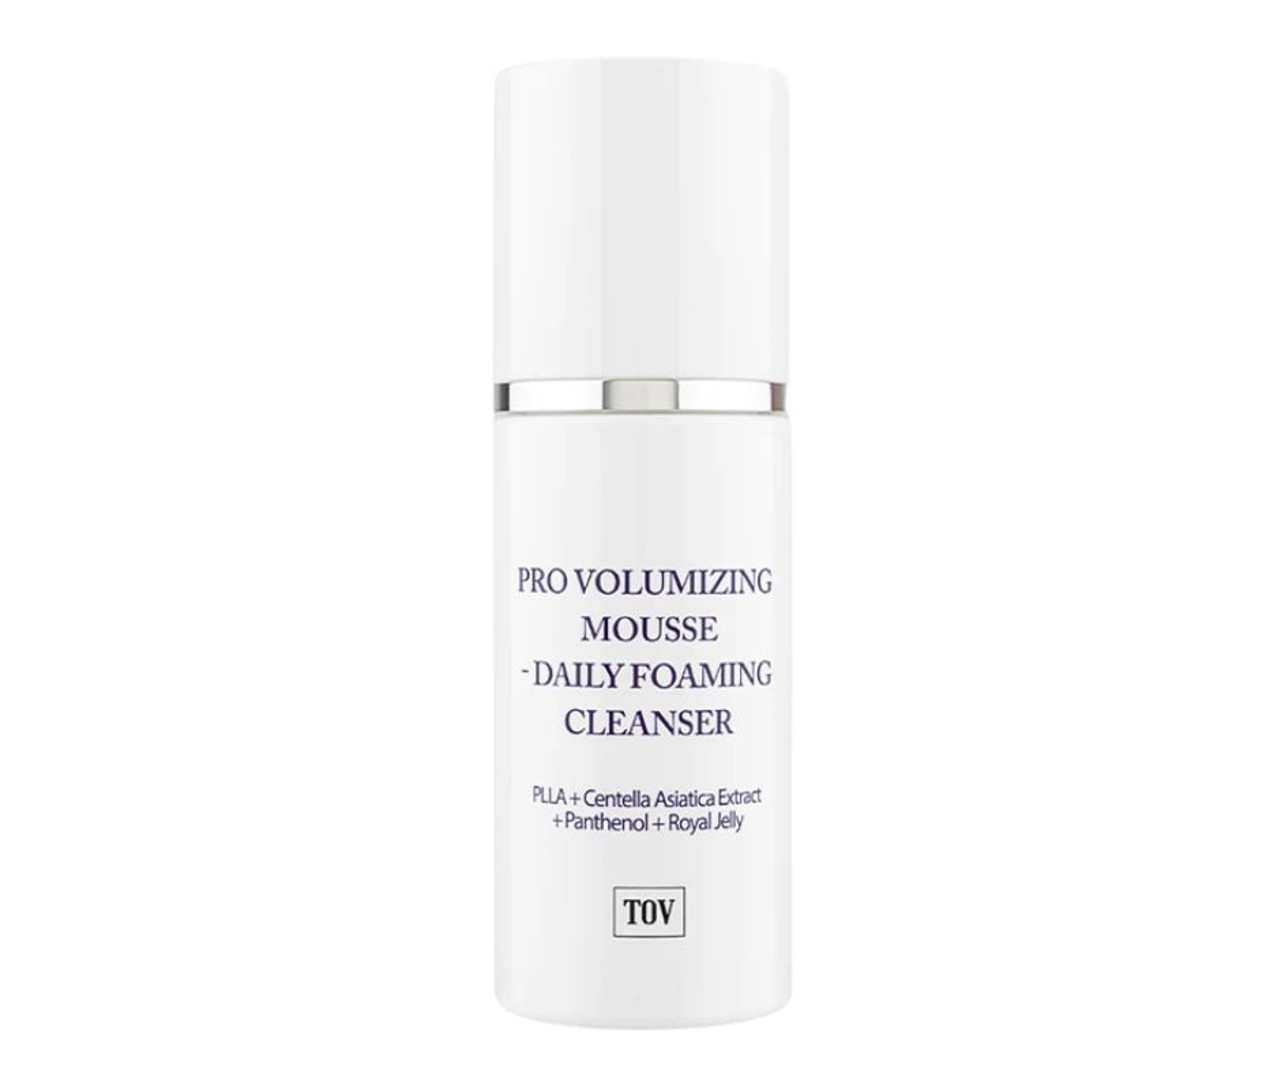 HOP+ Pro Volumizing Mousse Daily Foaming Cleanser